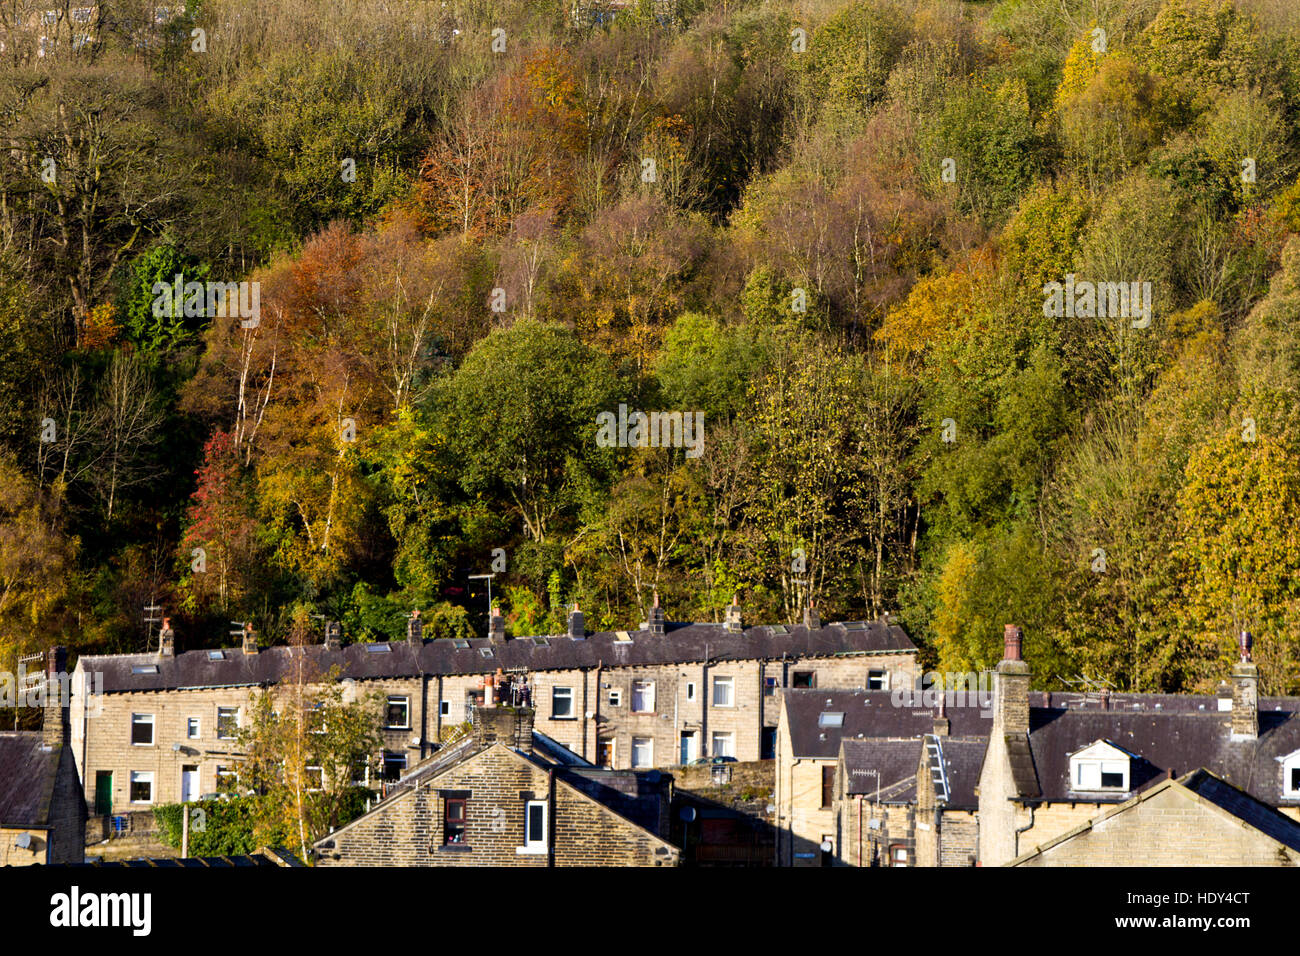 View of the Yorkshire mill town of Hebden Bridge, Calderdale, West Yorkshire, England UK Stock Photo